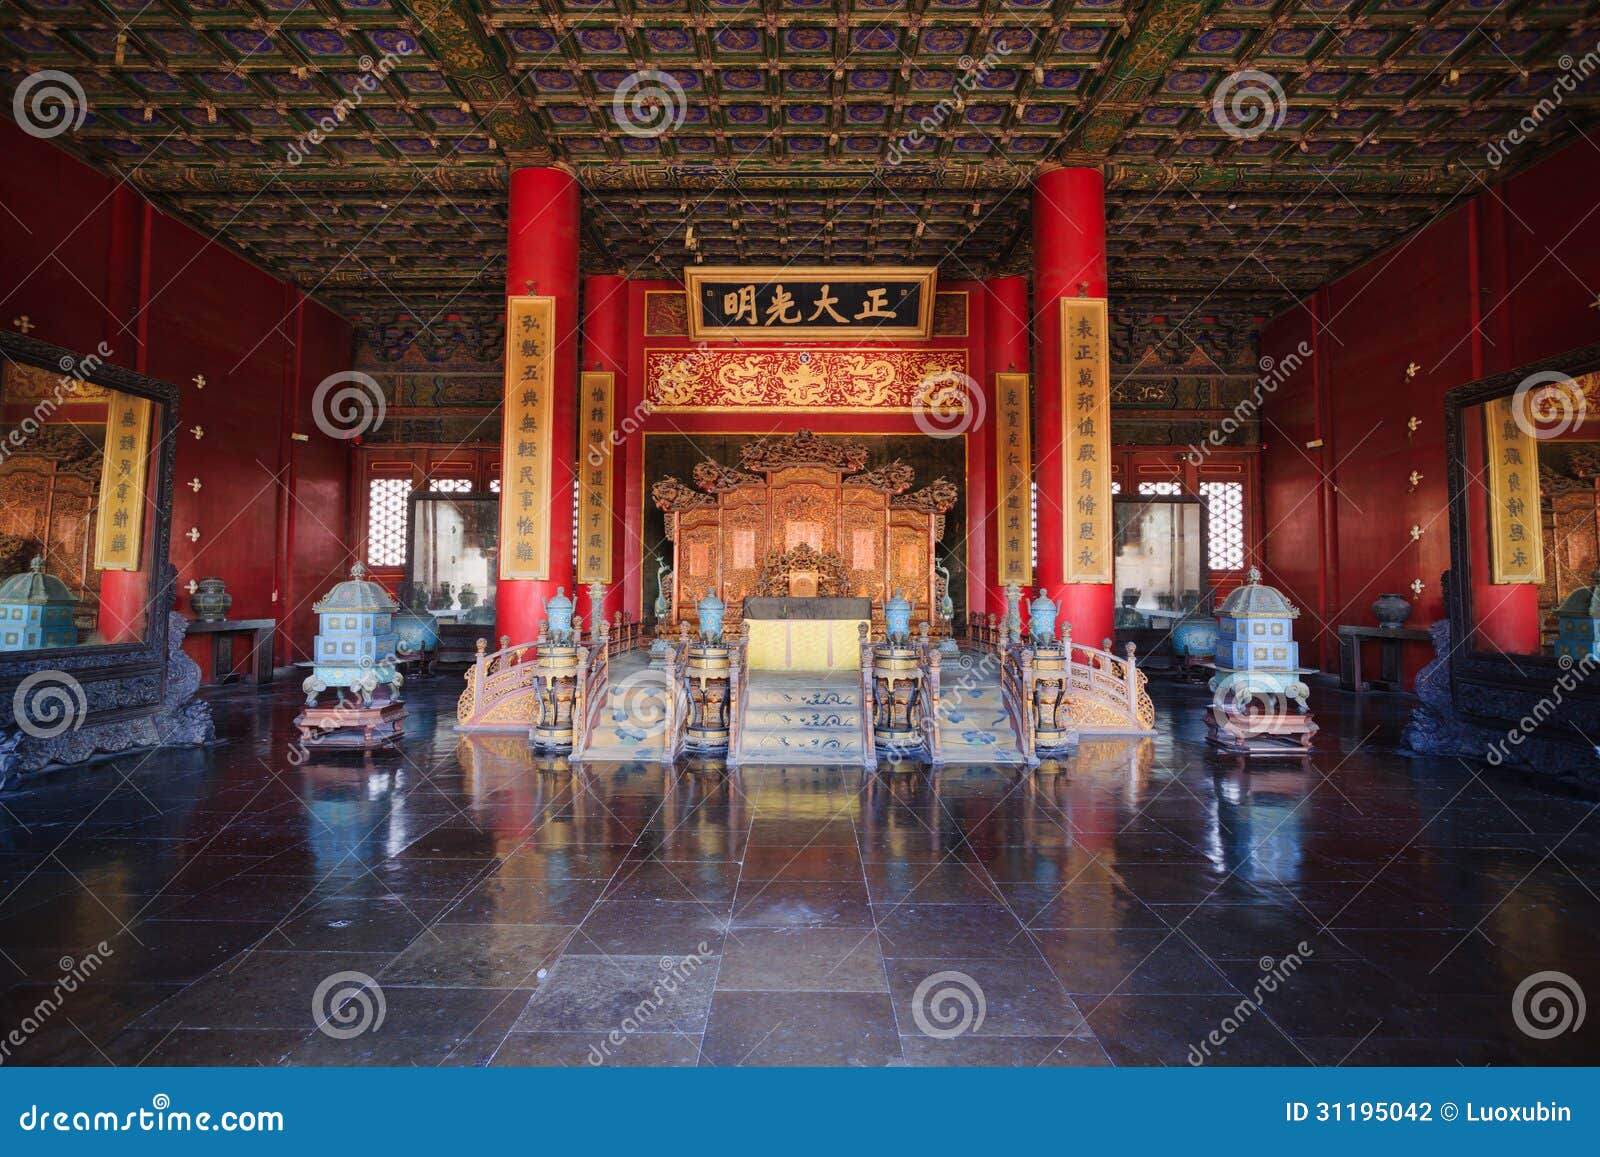 palace of heavenly purity interior